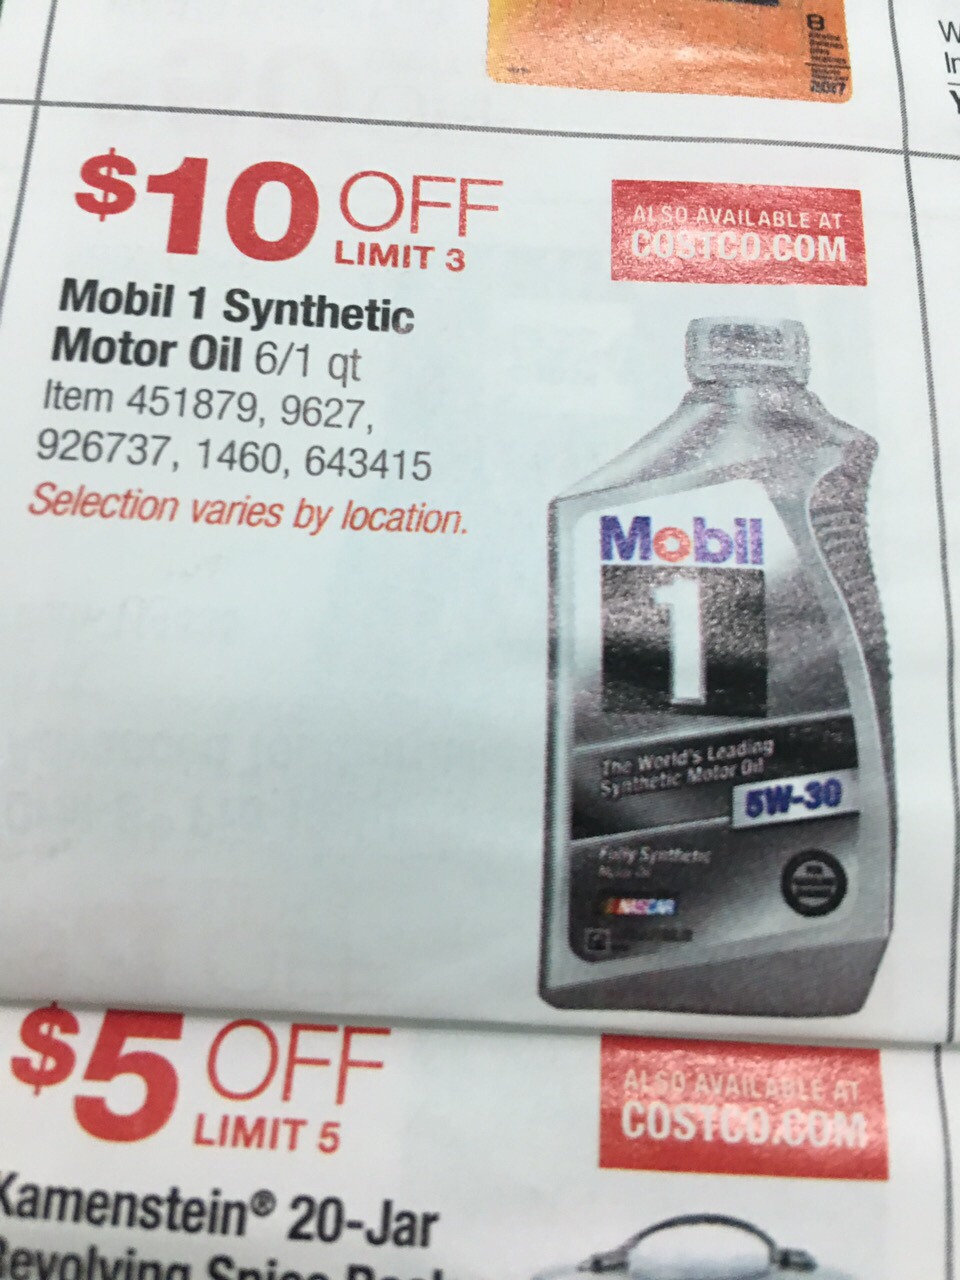 mobil-1-synthetic-rebate-tundratalk-toyota-tundra-discussion-forum